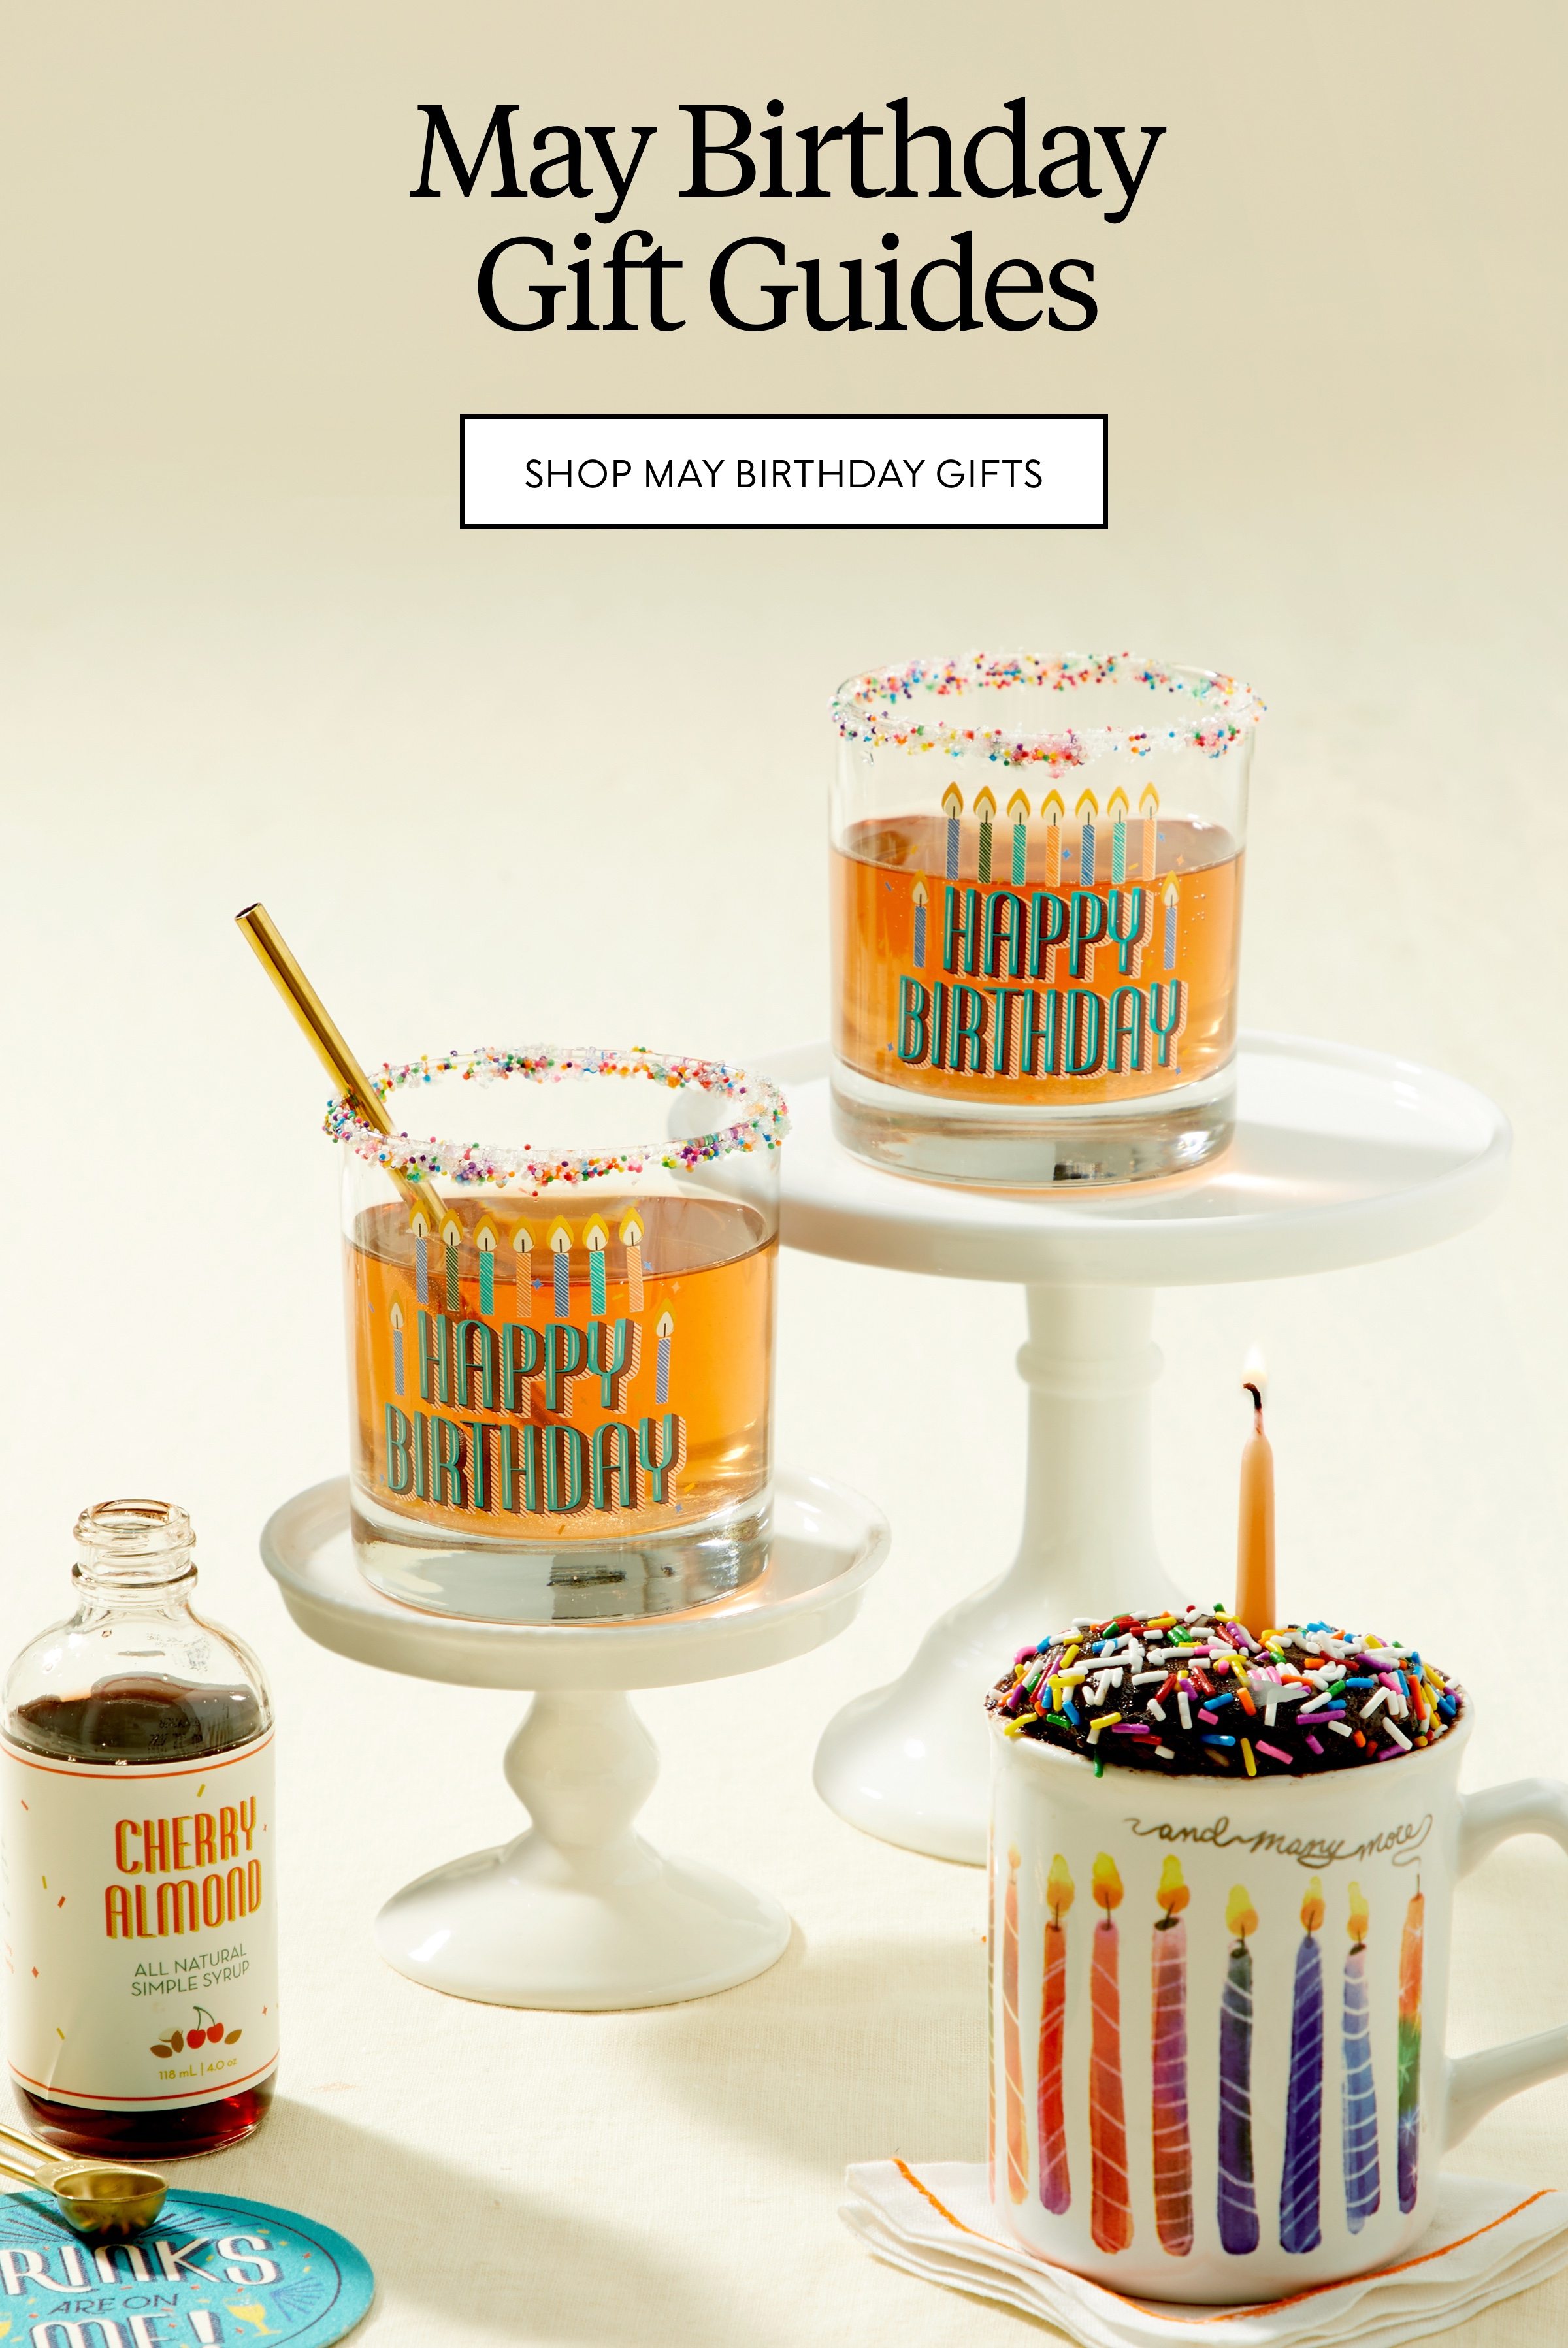 May birthday gift guide. Shop birthday gifts